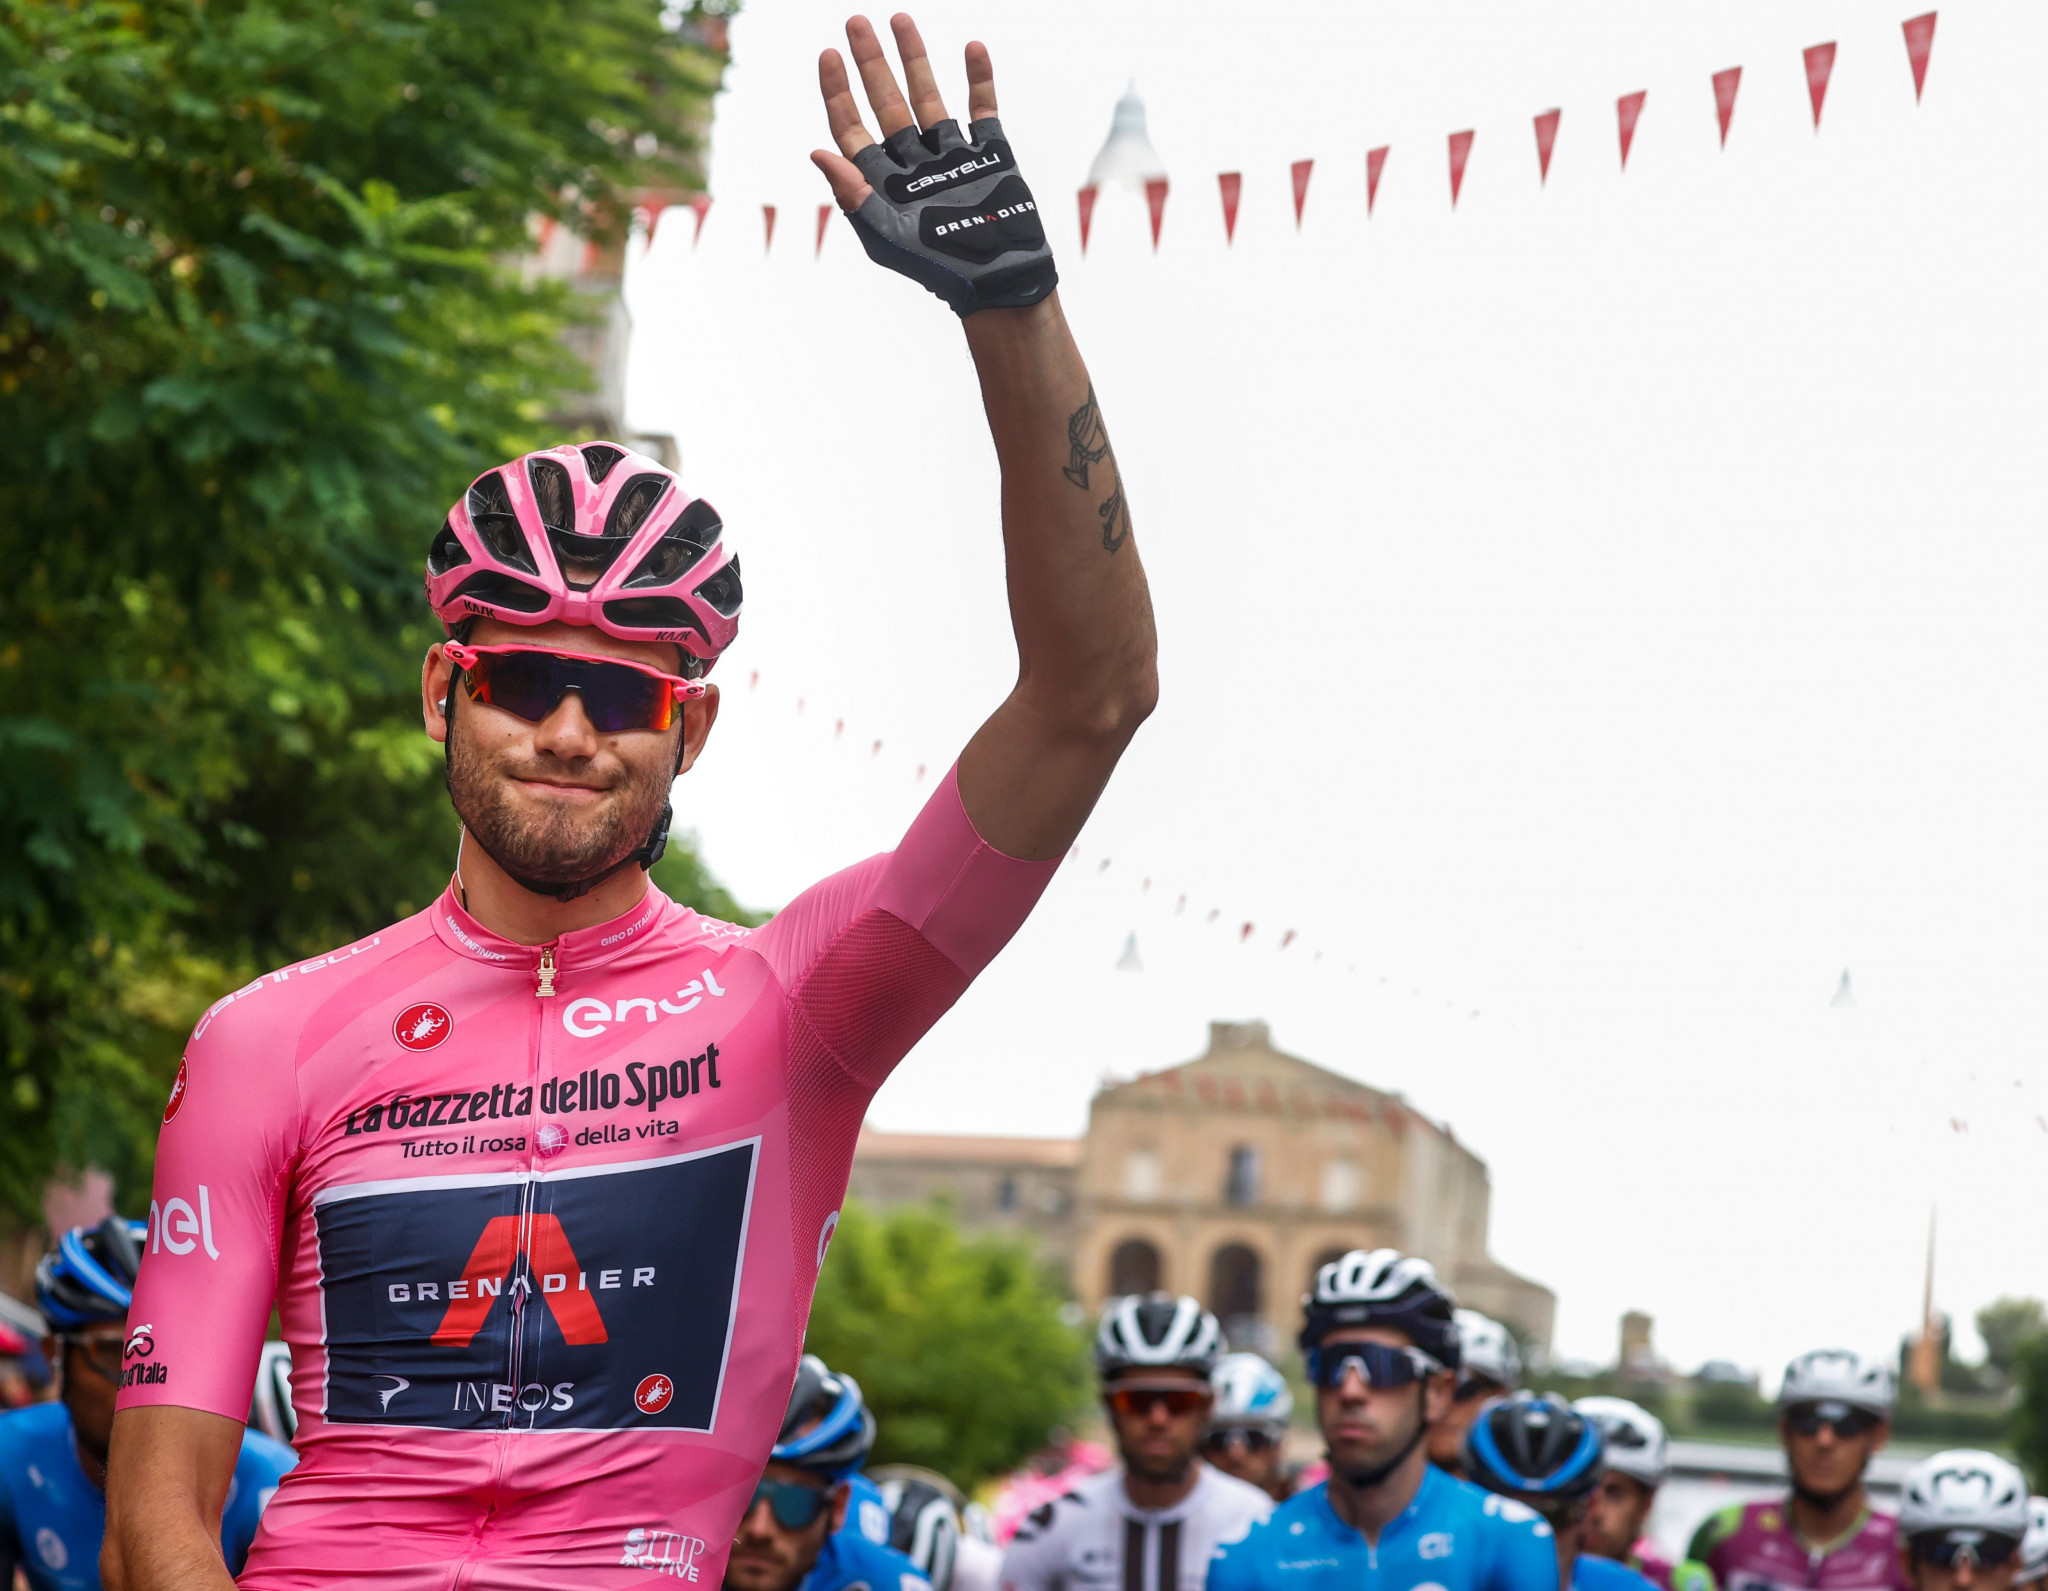 Filippo Ganna won four stages at this year's Giro d'Italia and wore the race leader's jersey in the early stages ©Getty Images